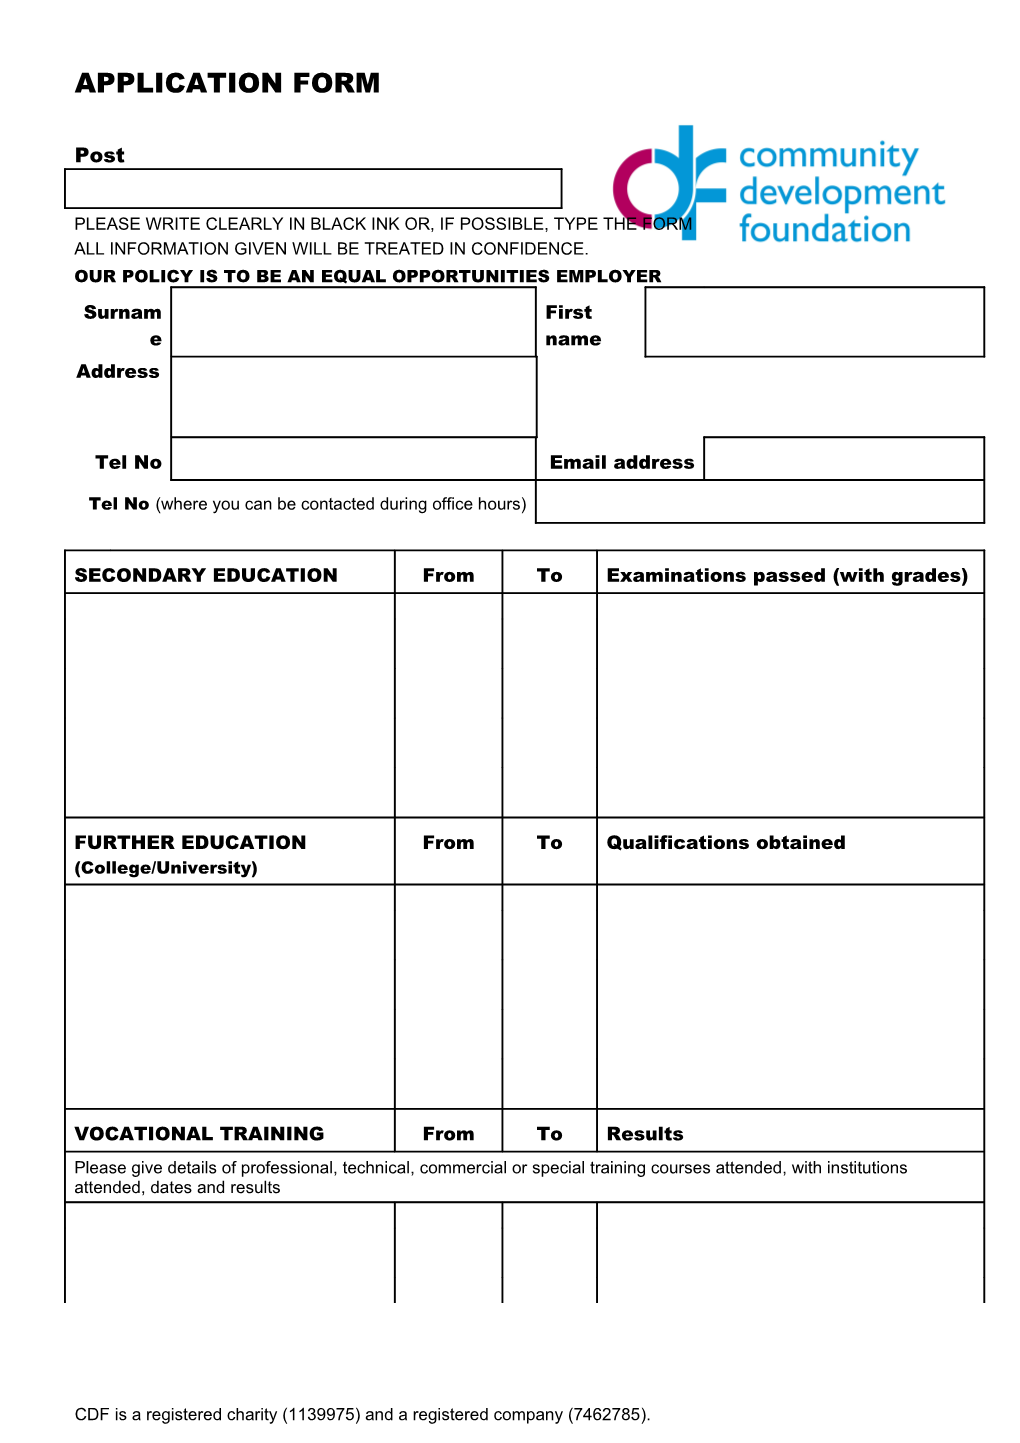 Application Form s37